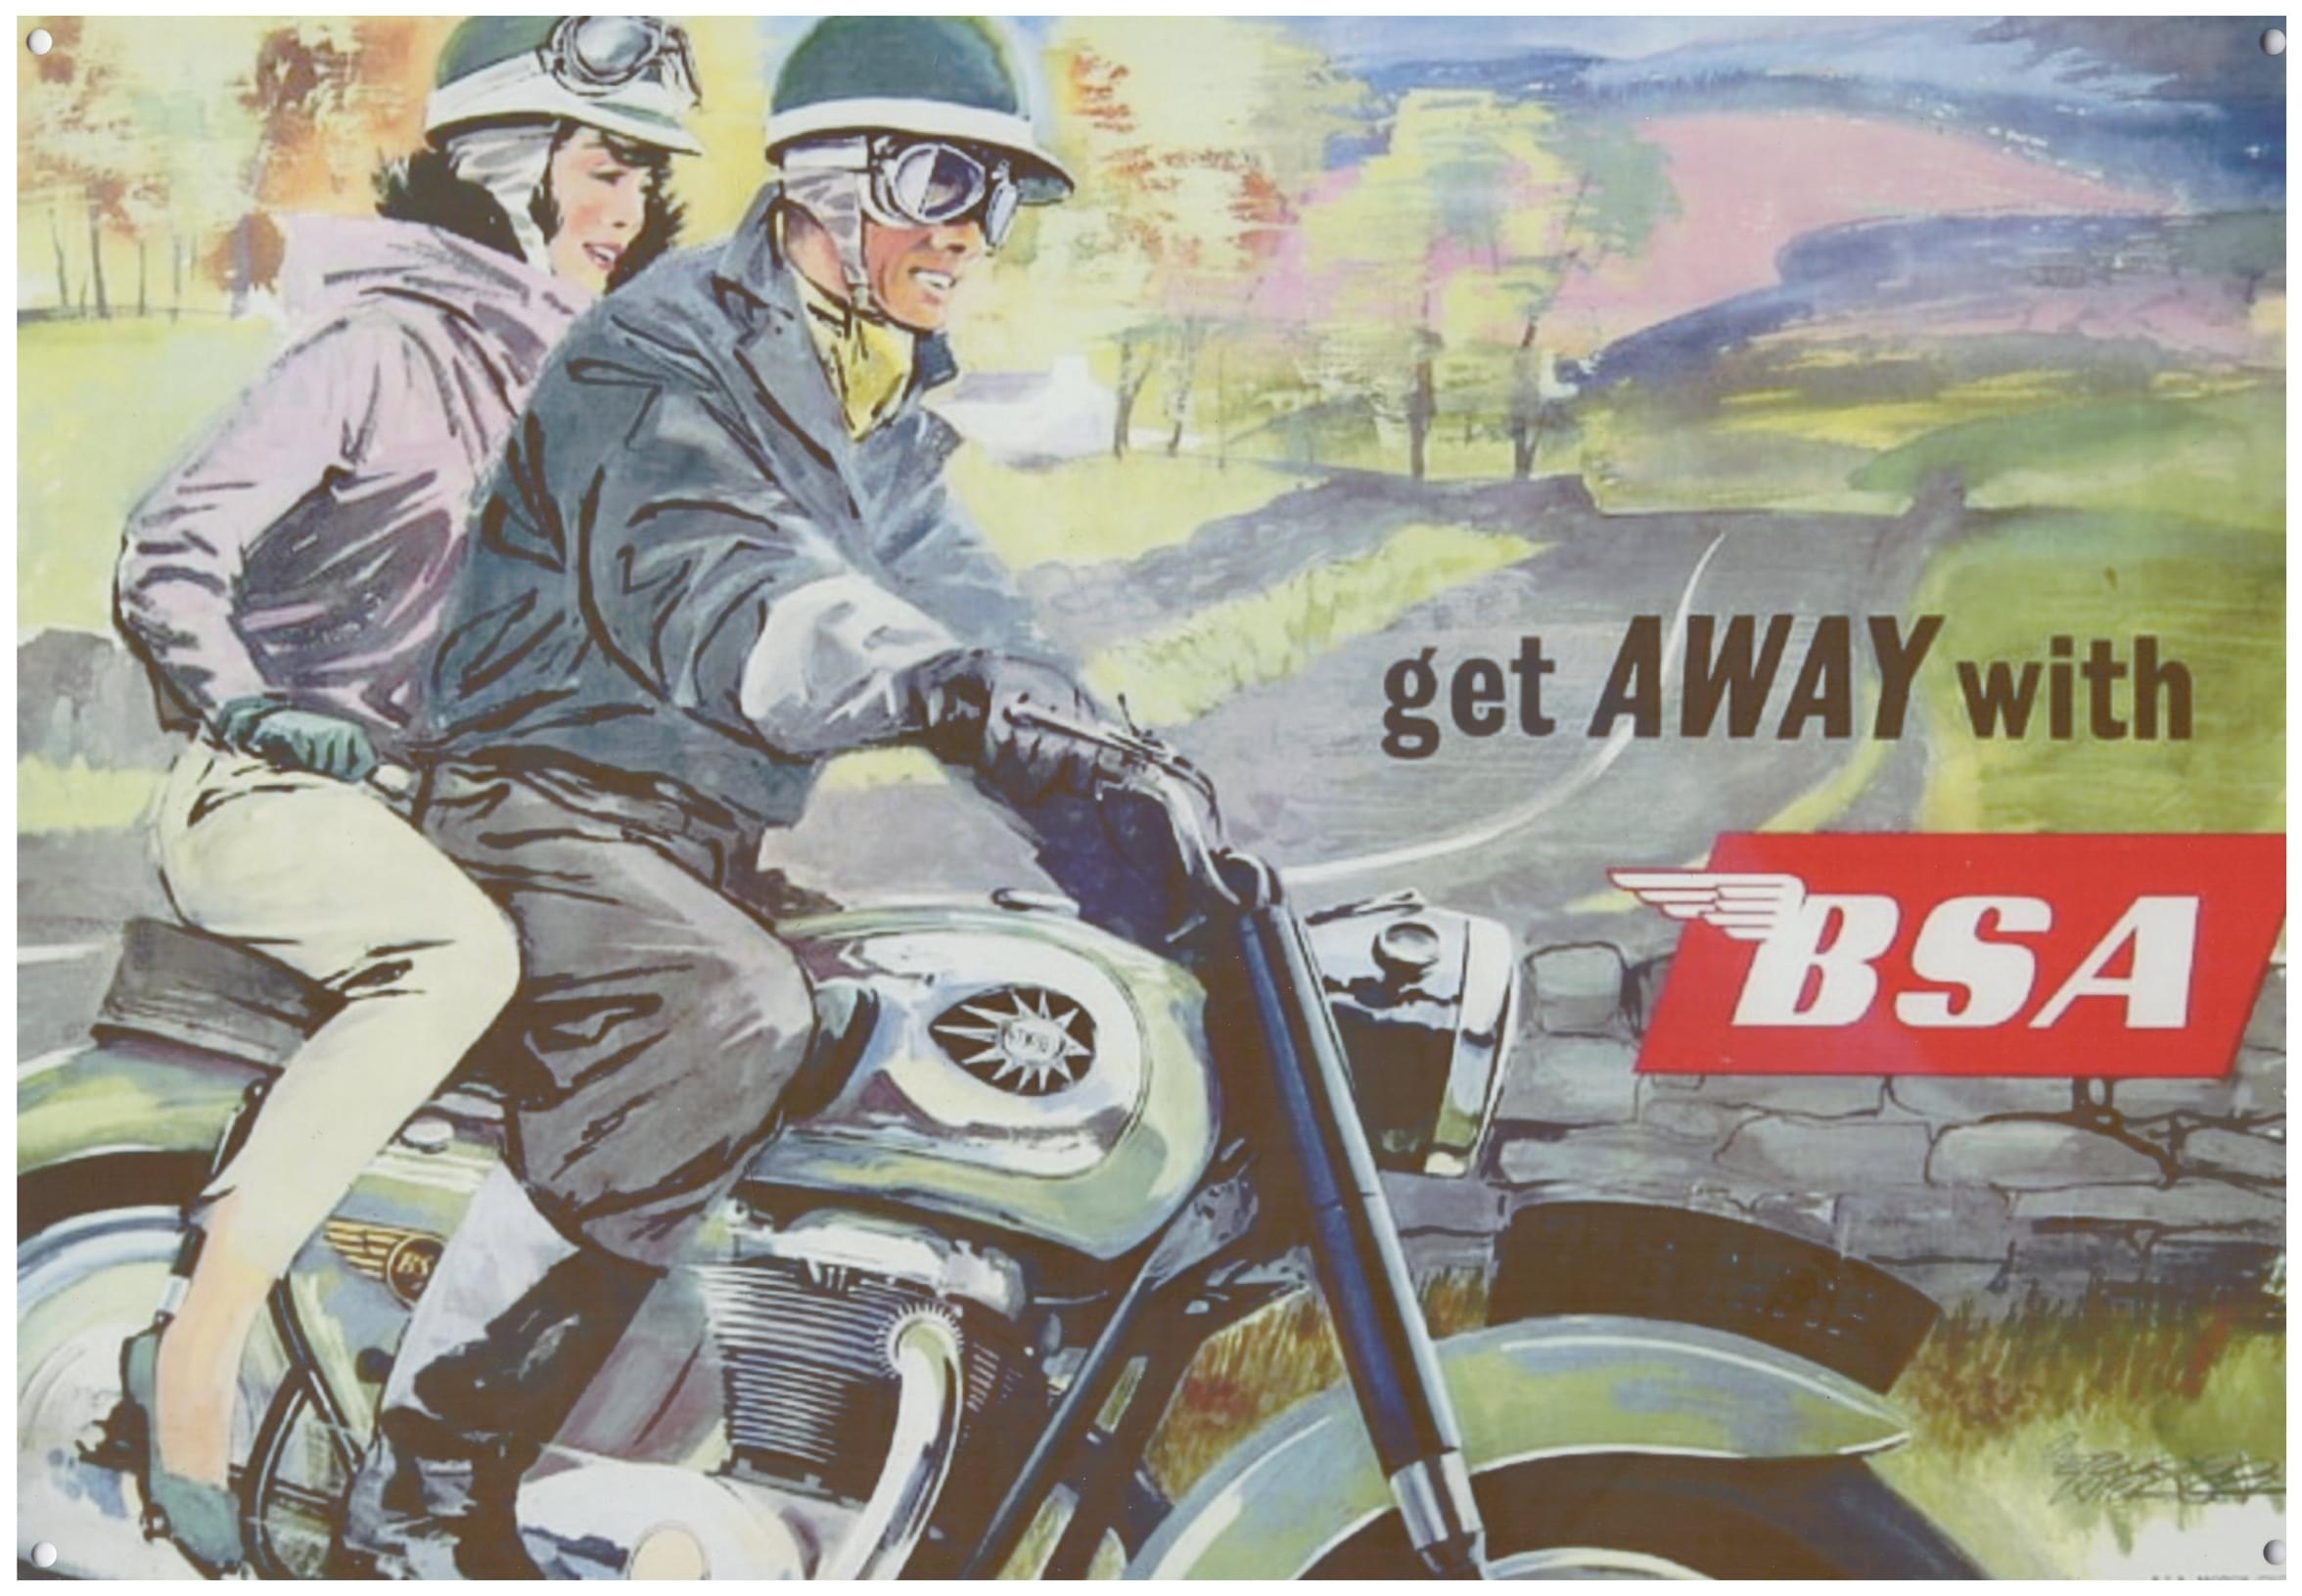 Get away with BSA - Old-Signs.co.uk